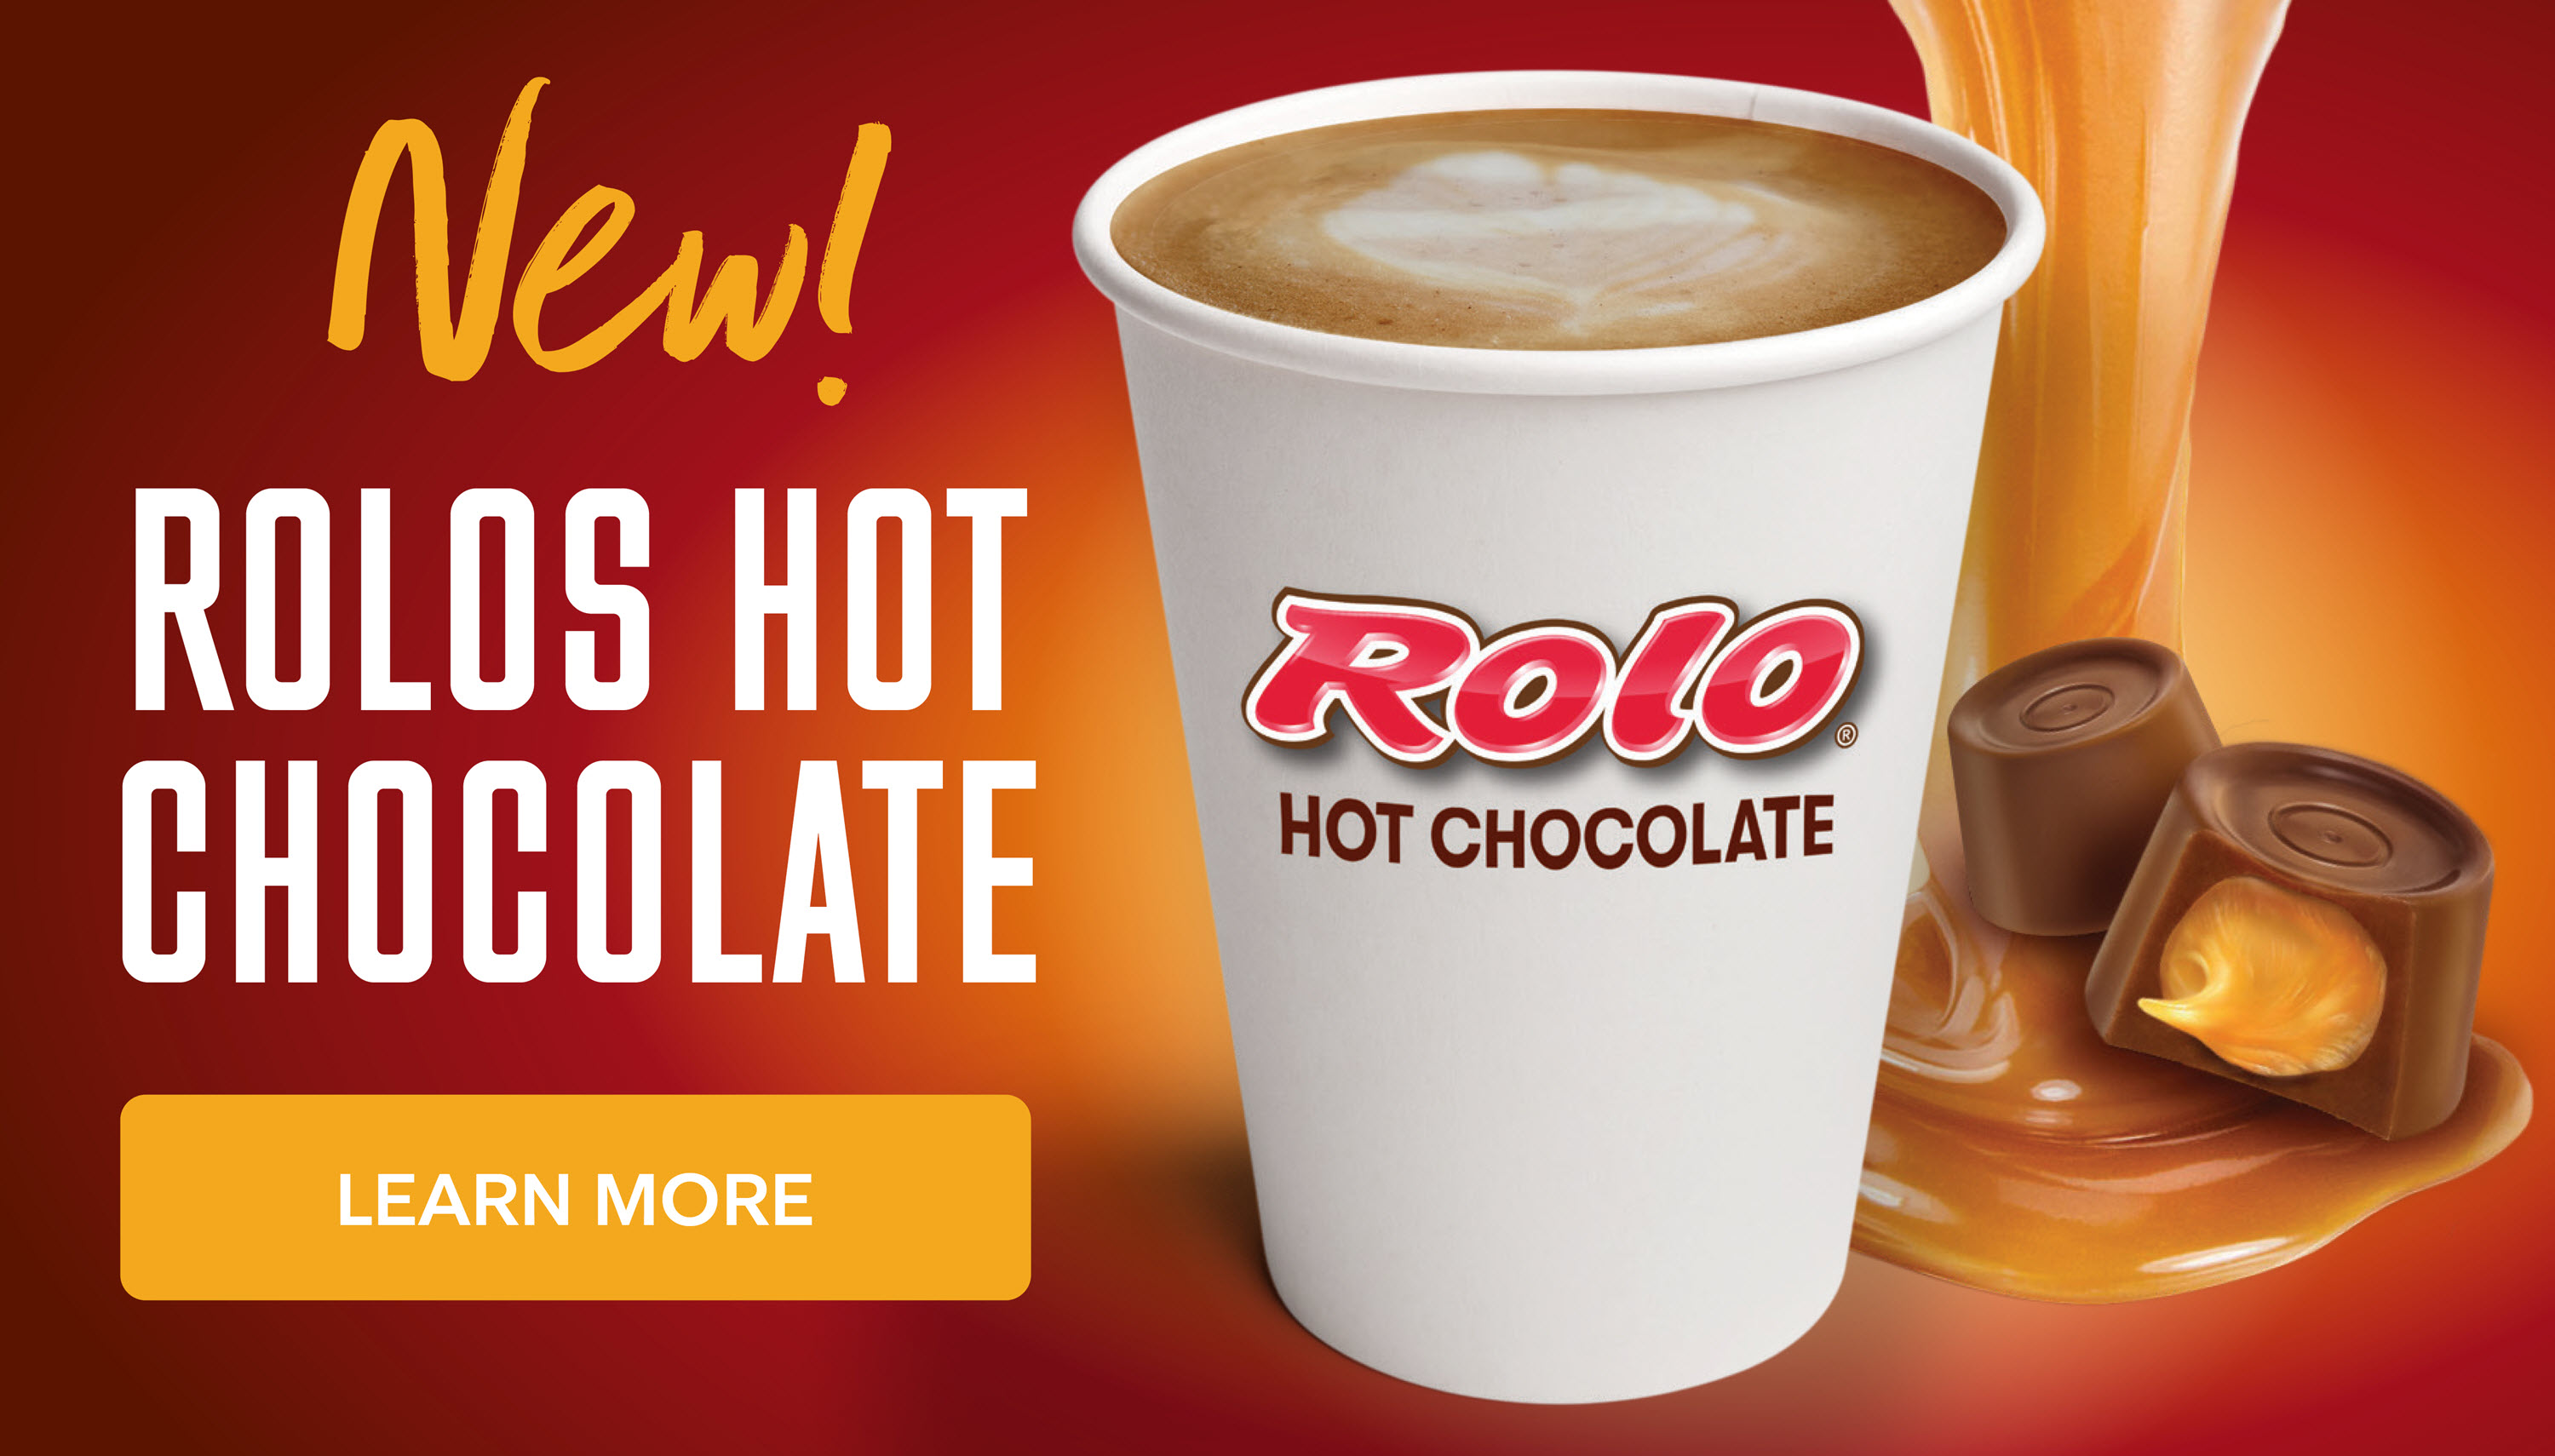 New! Rolos Hot Chocolate